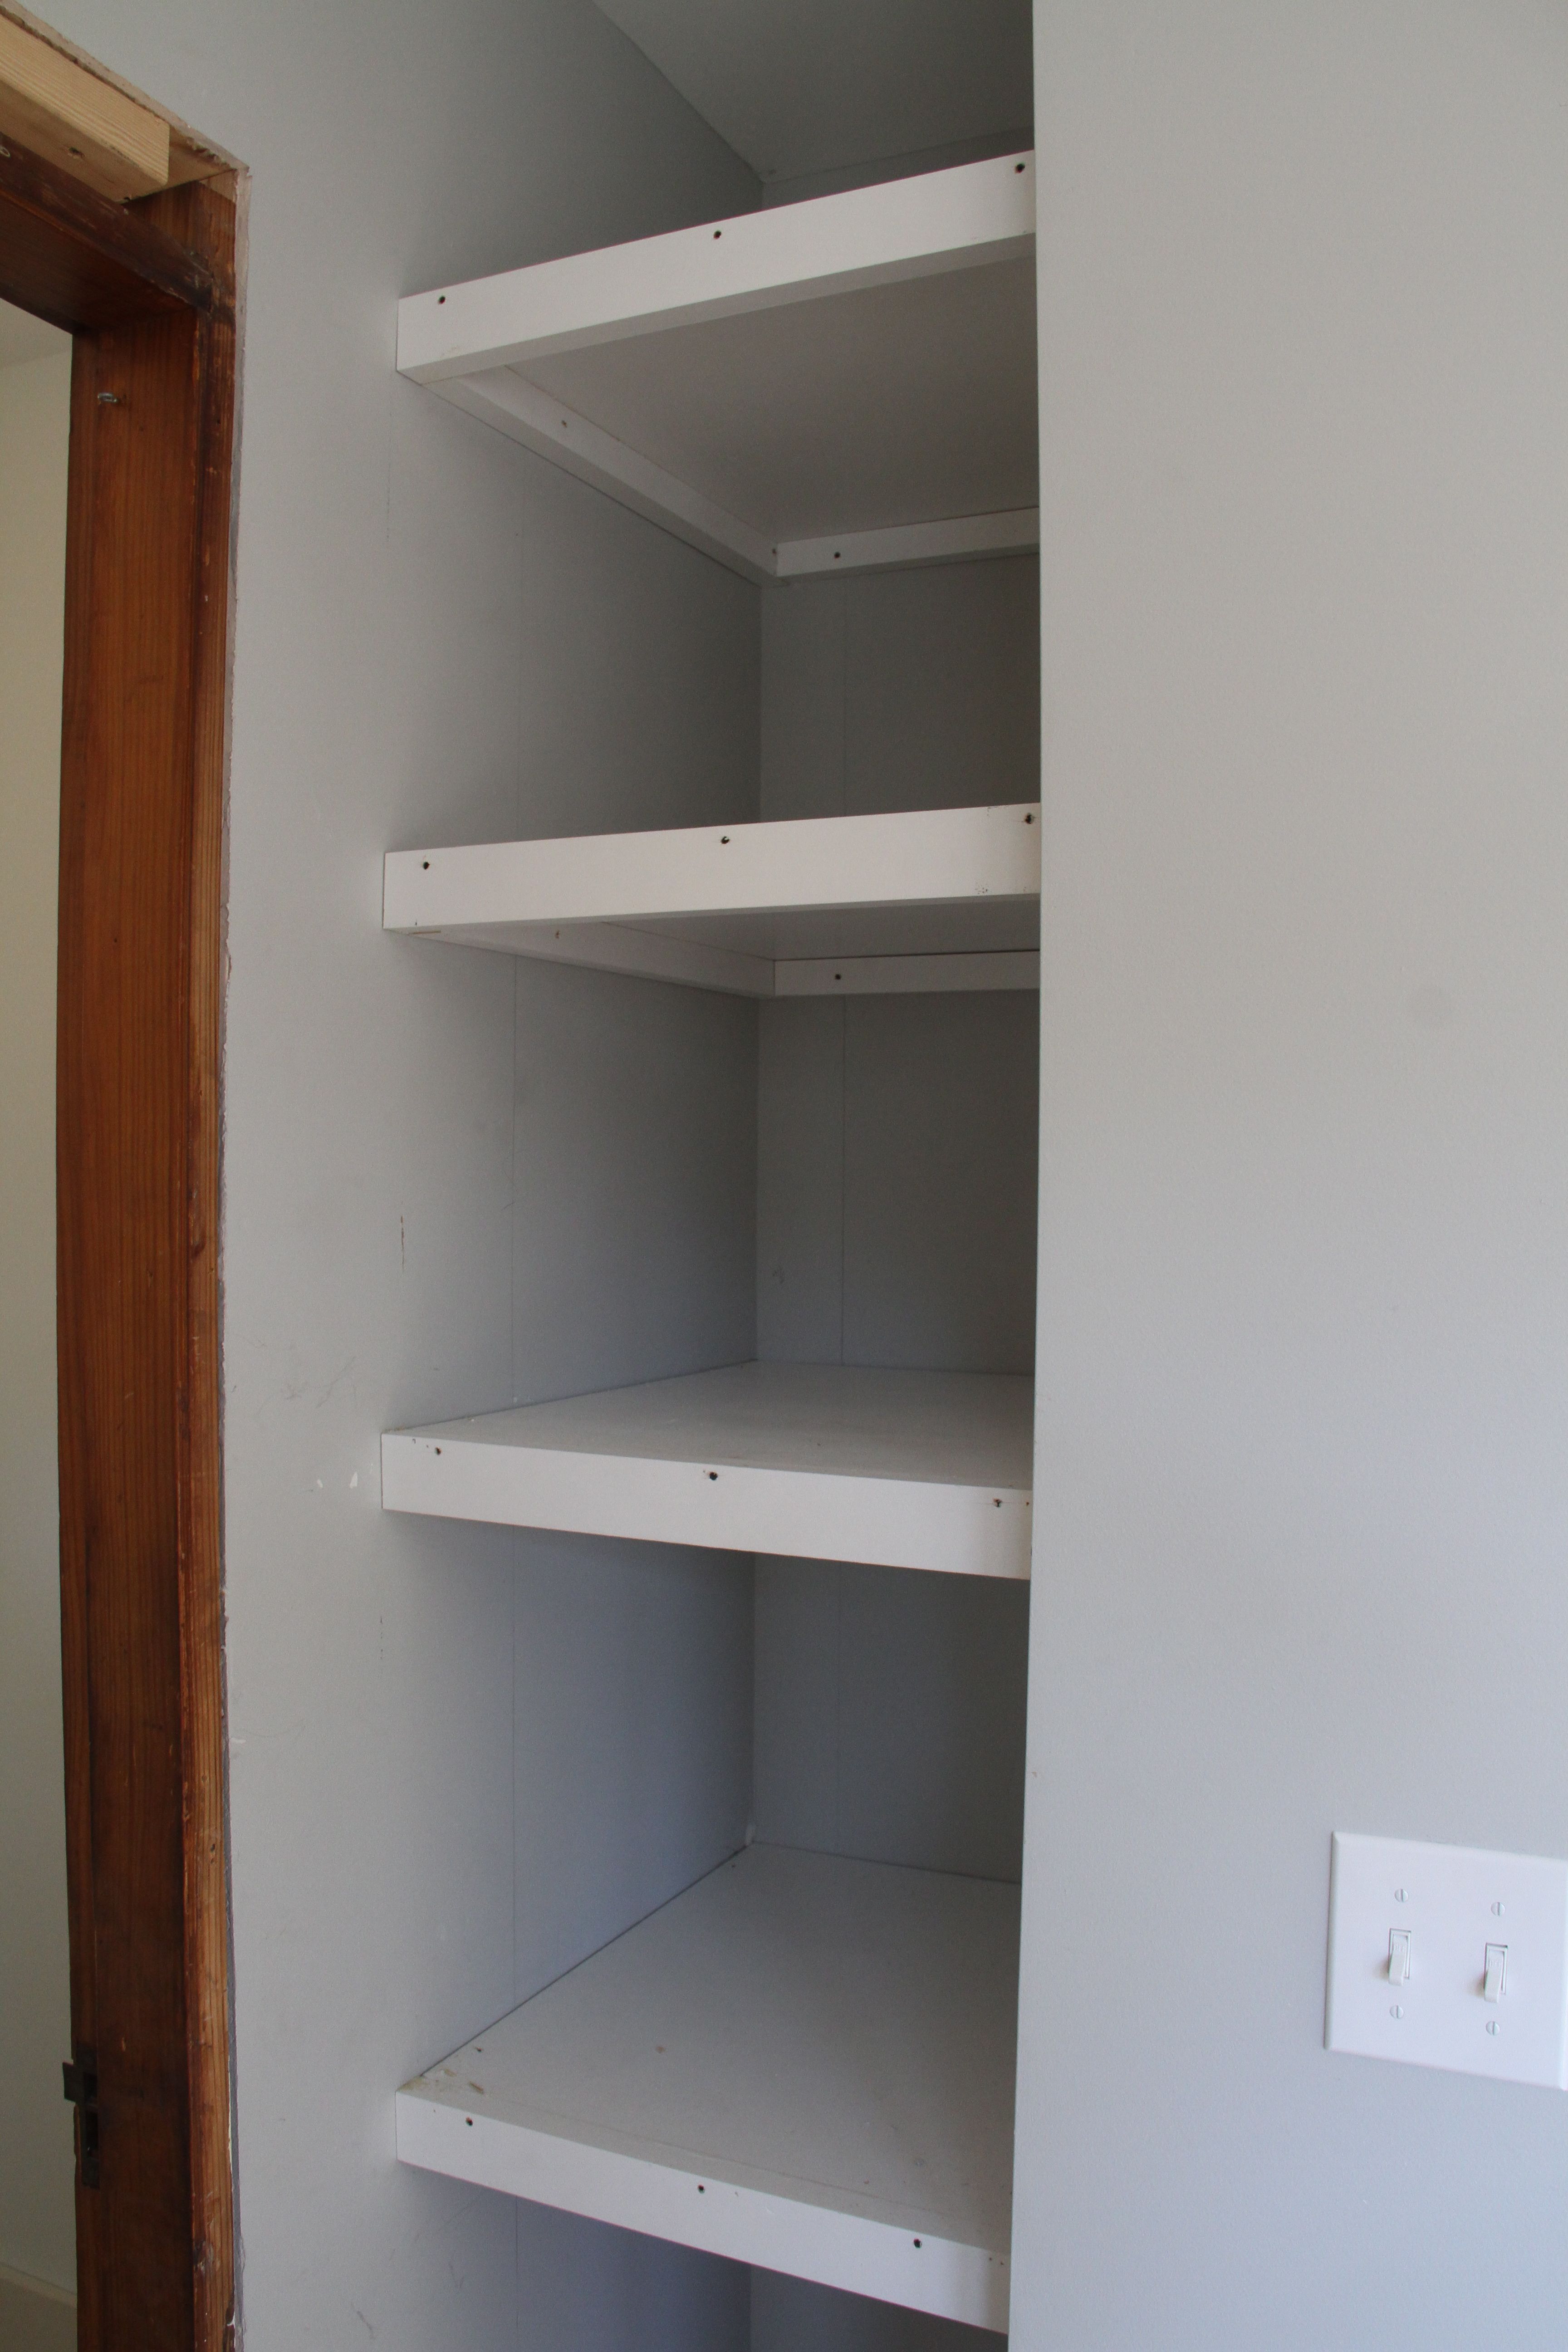 Built-in pantry, formerly a portion of the powder room. We took that space back because the kitchen needed it.